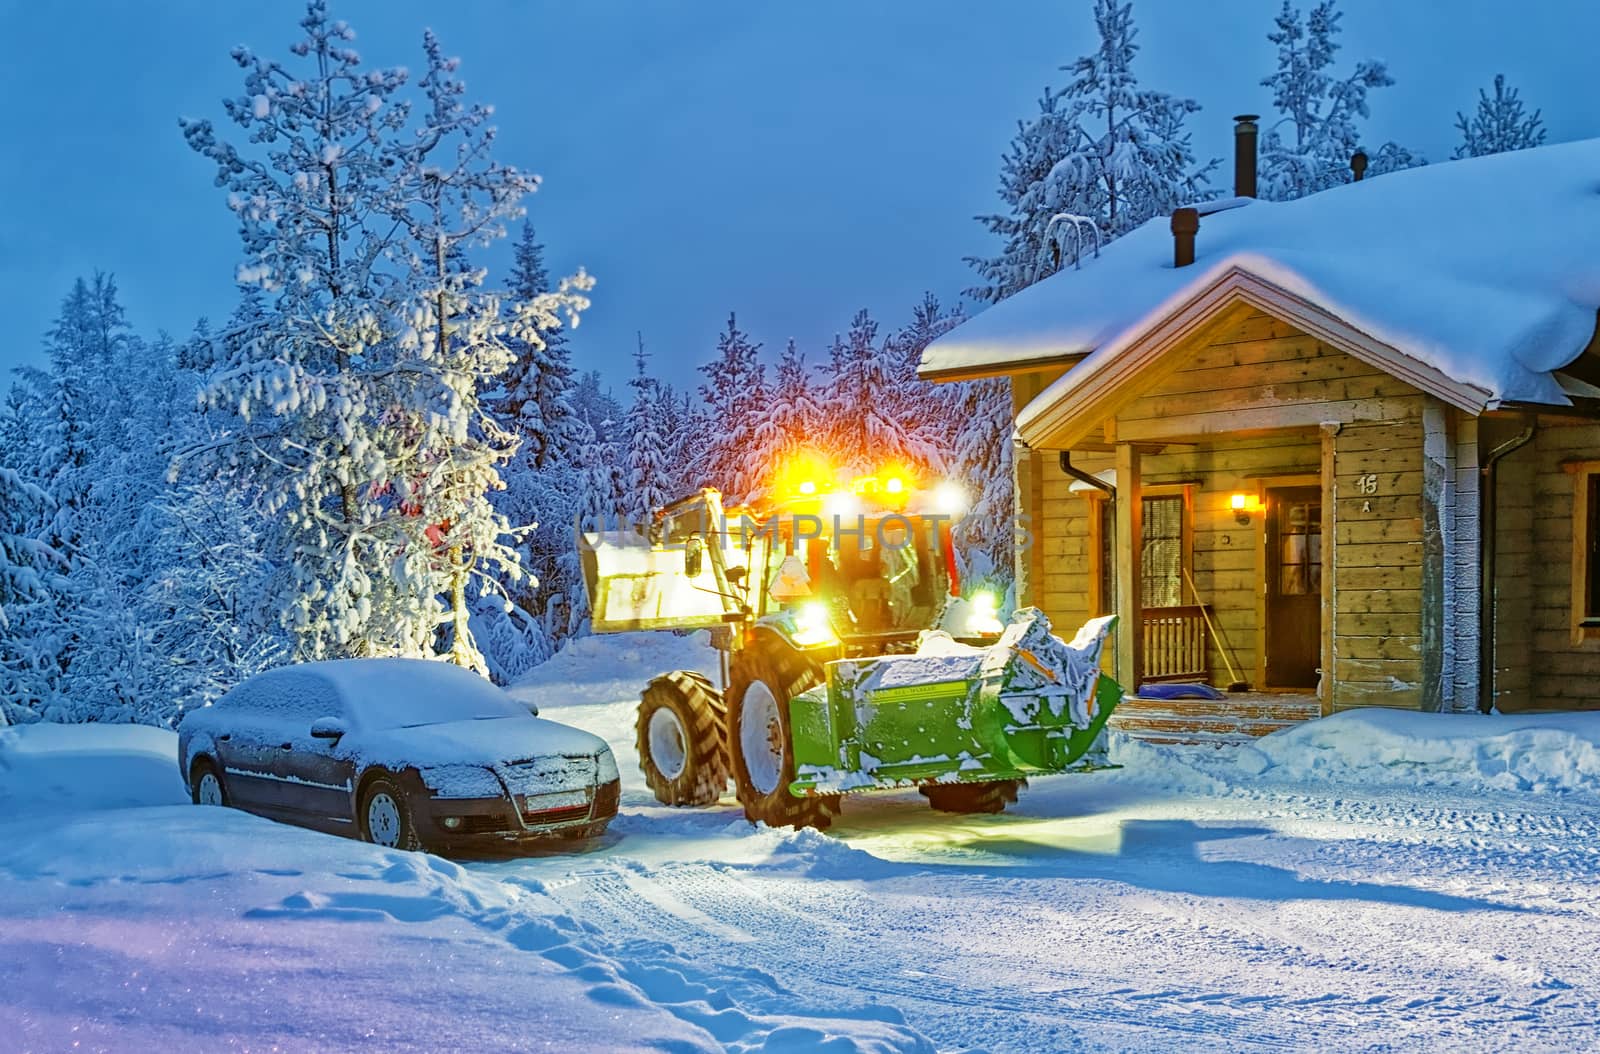 Tractor cleaning snow near house in winter finland  by erix200511@mail.ru